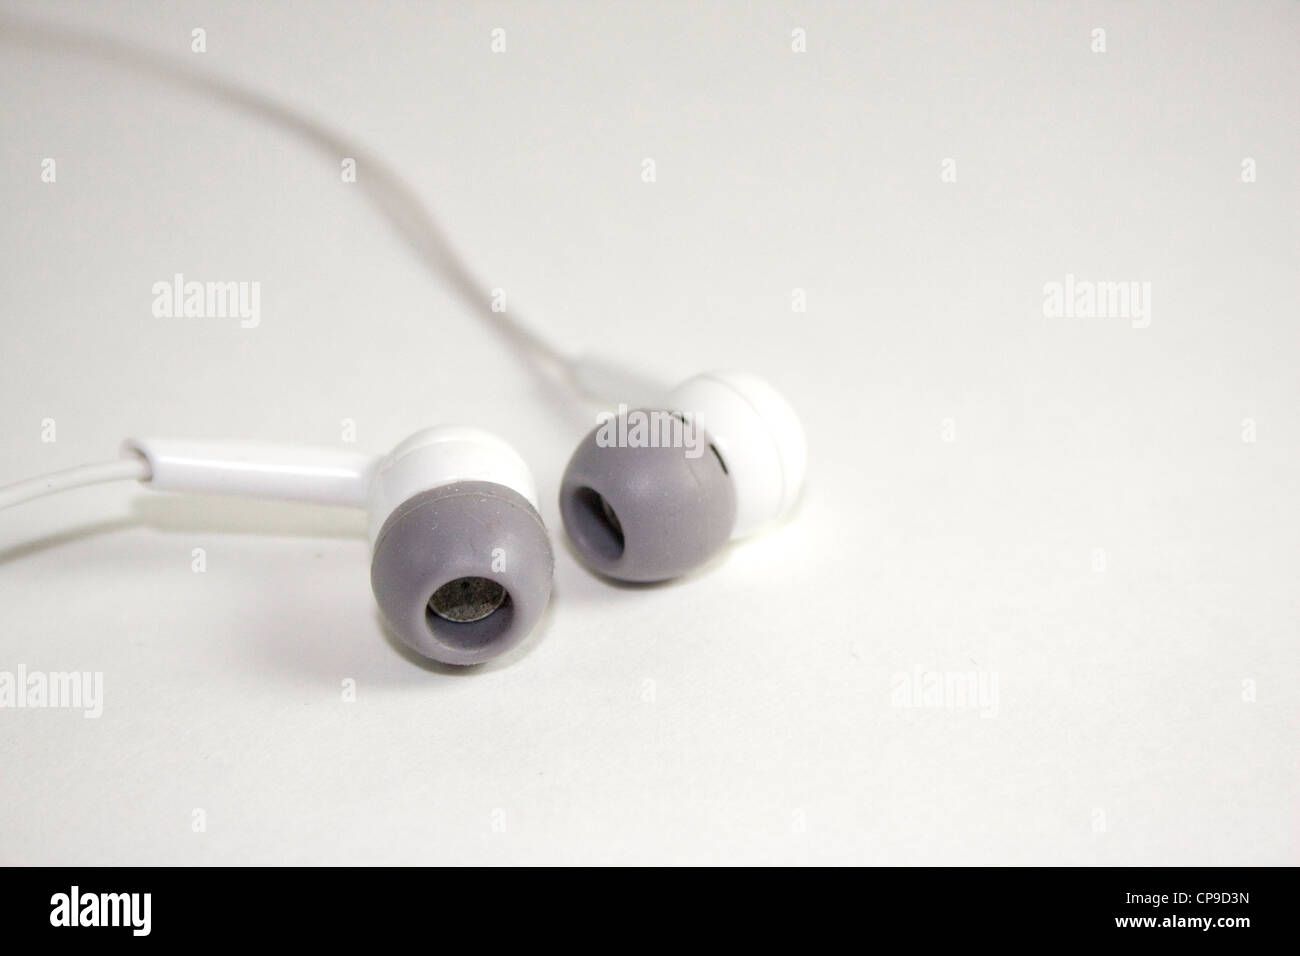 MP3 player earbuds on white background Stock Photo